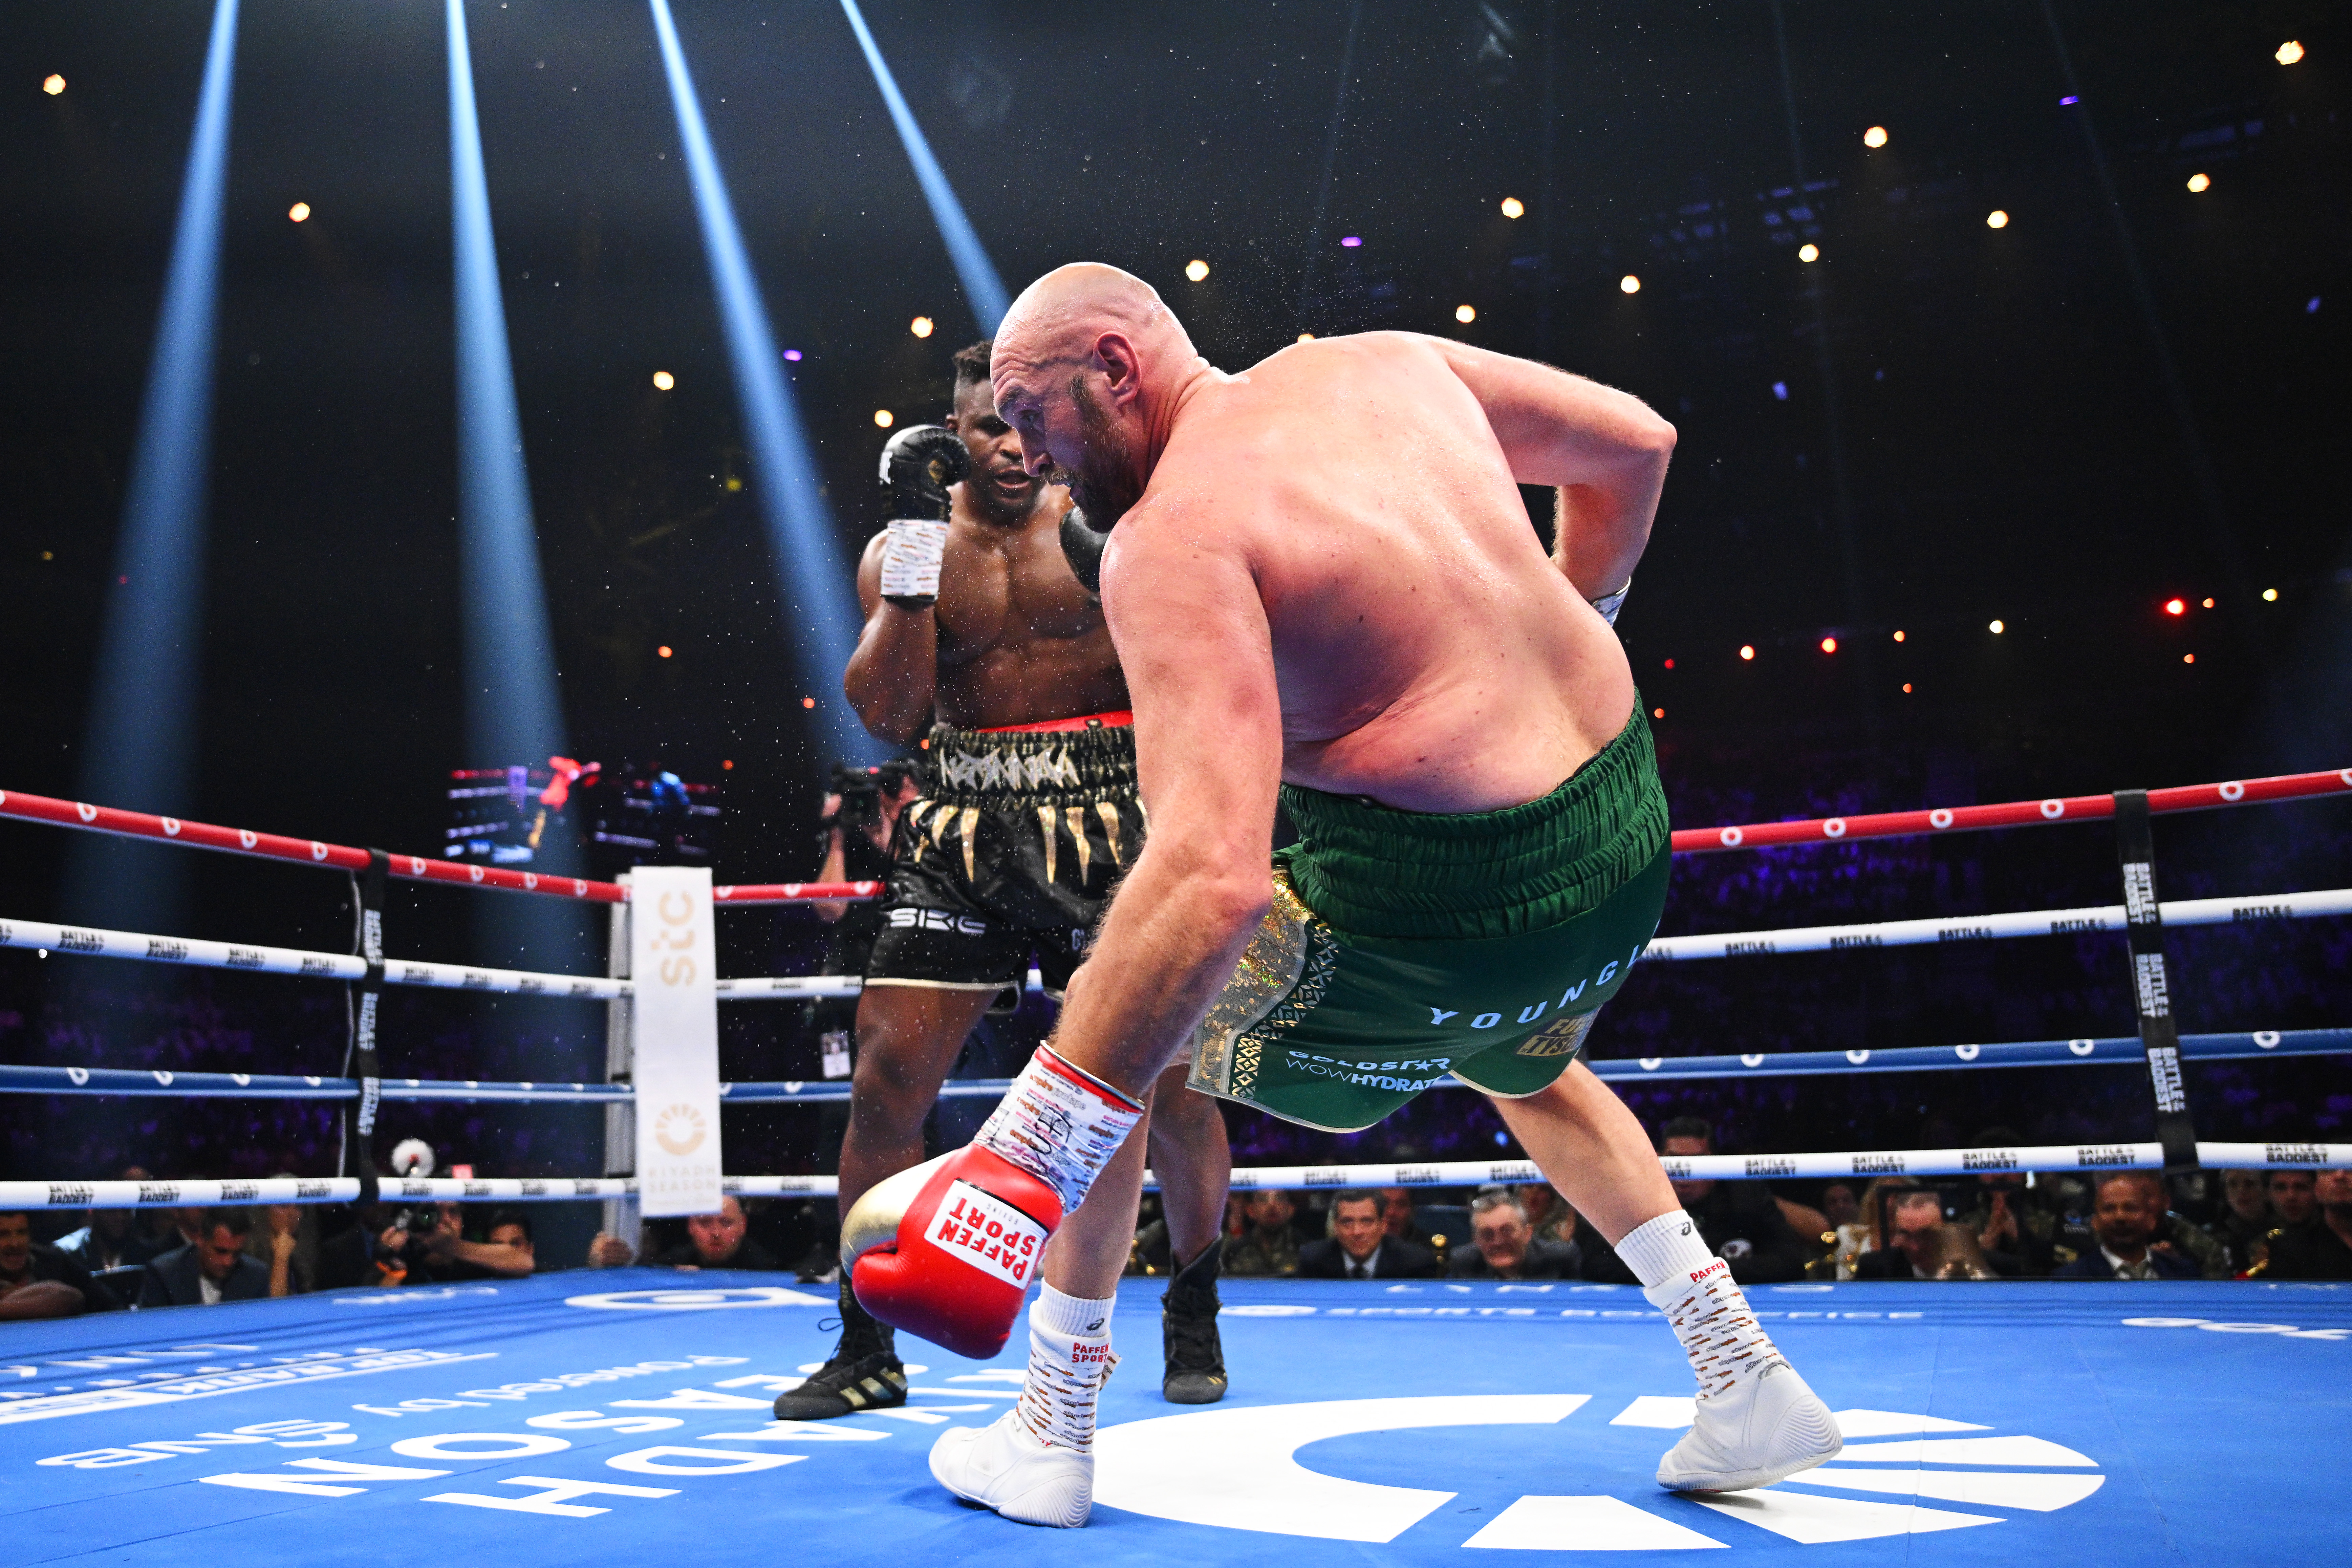 Tyson Fury: Deontay Wilder punches harder than Francis Ngannou ‘by a mile’